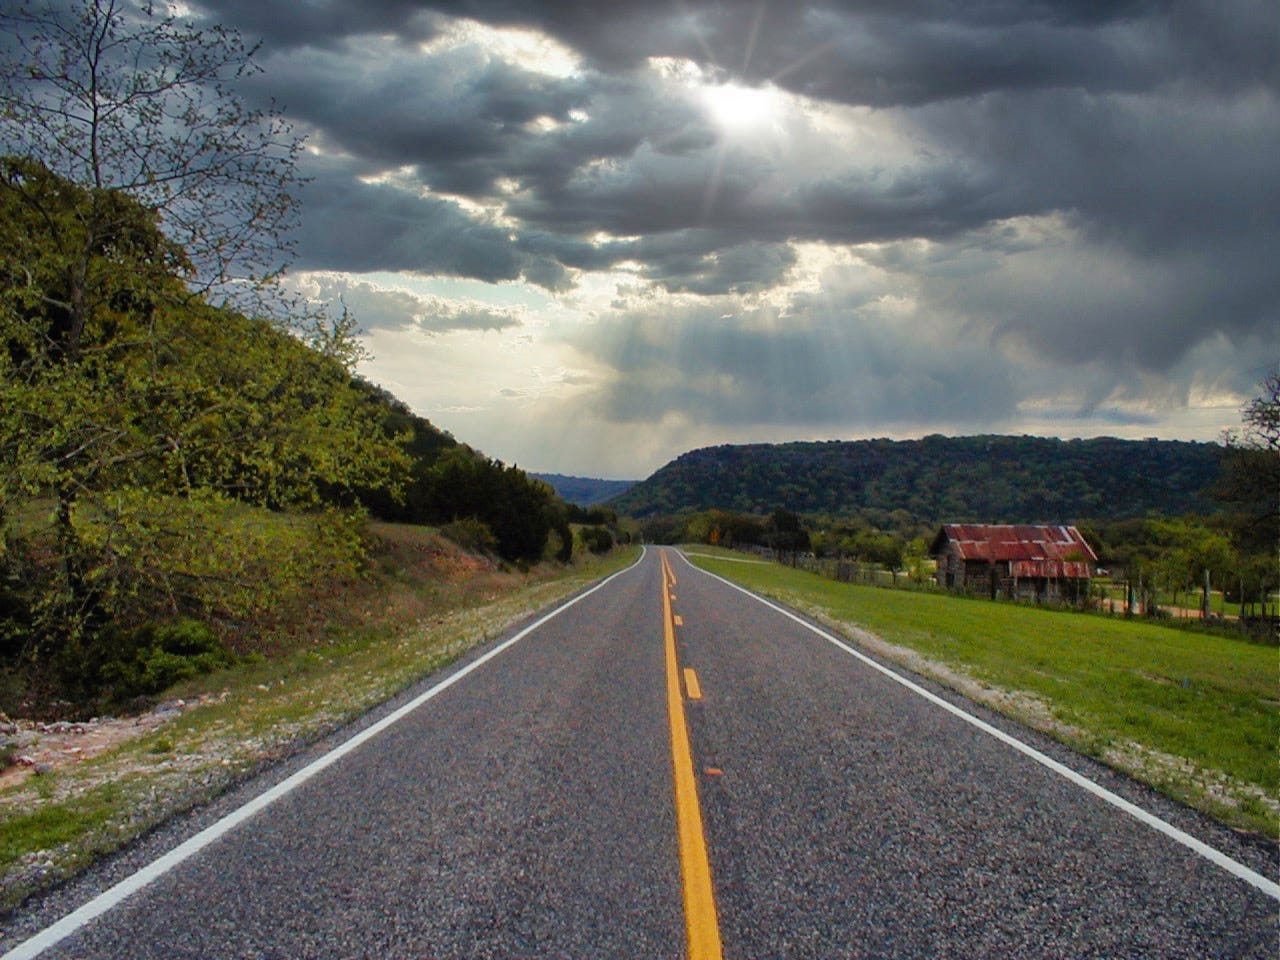 a two-lane highway with a yellow stripe down the middle, trees on the left, a field with an old barn on the right, grey clouds with rays of sunlight piercing thorugh in the sky